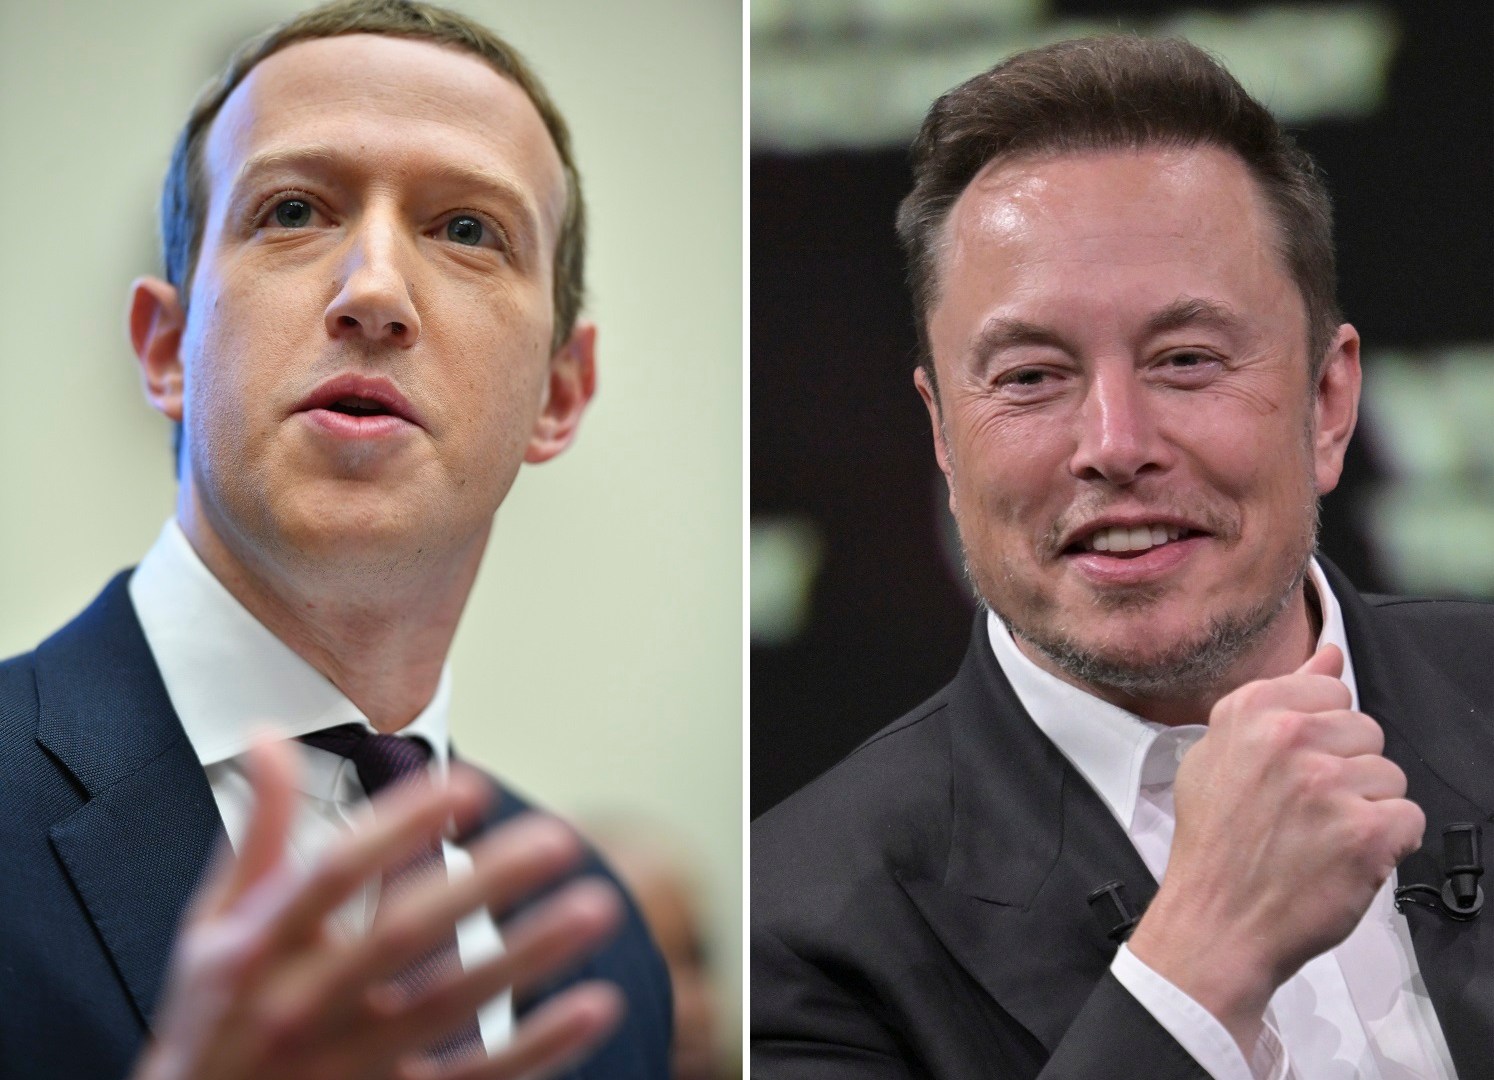 Musk not serious about cage fight; time to move on, Zuckerberg says